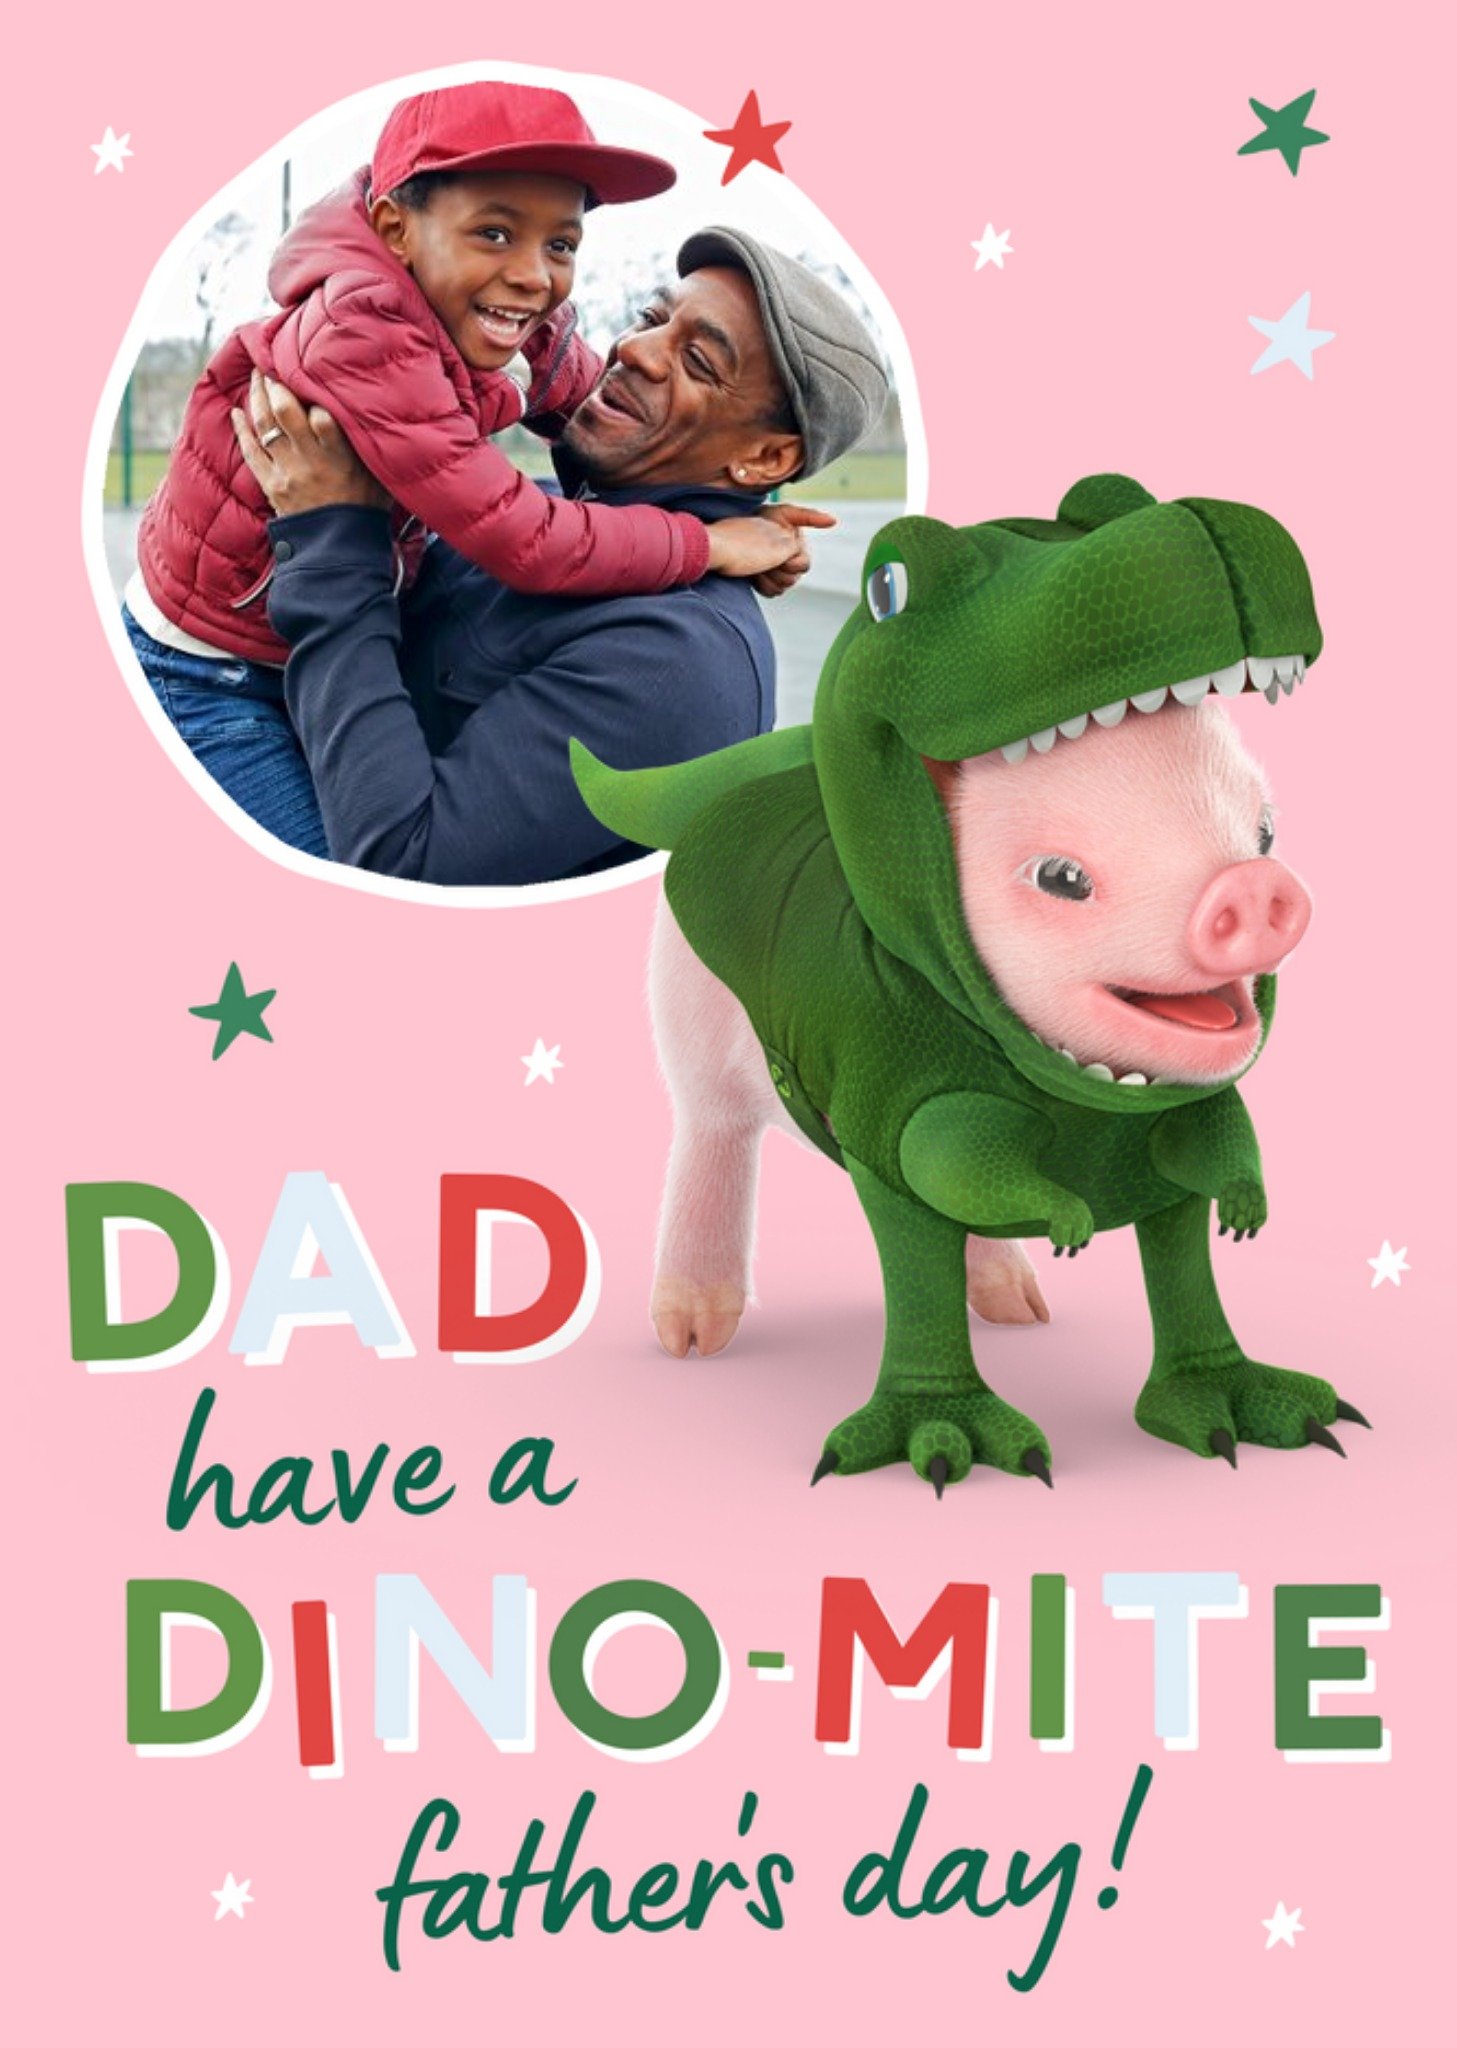 Moonpig Exclusive Moonpigs Cute Dinosaur Pig Dino Mite Photo Upload Father's Day Card Ecard